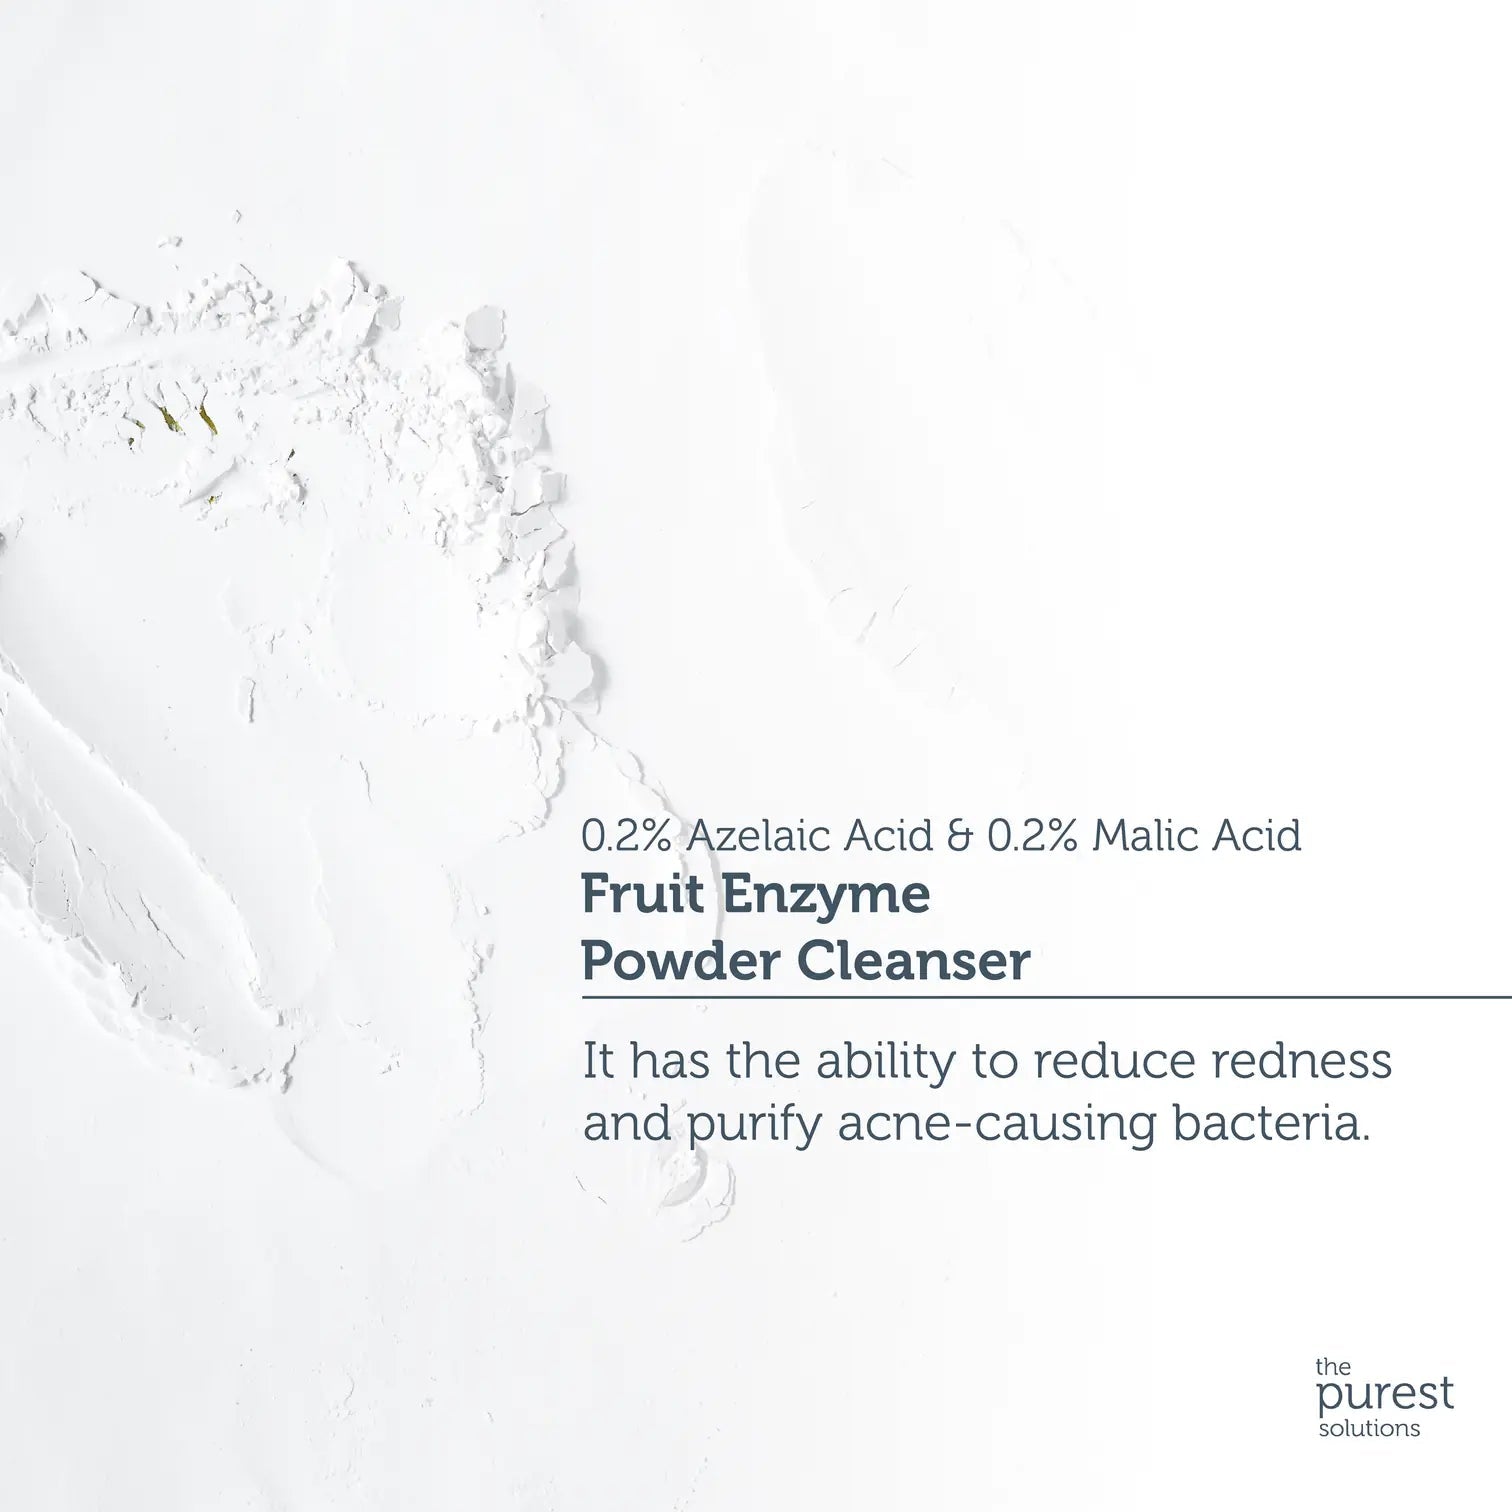 The Purest Solutions Fruit Enzyme Powder Cleanser Minoustore